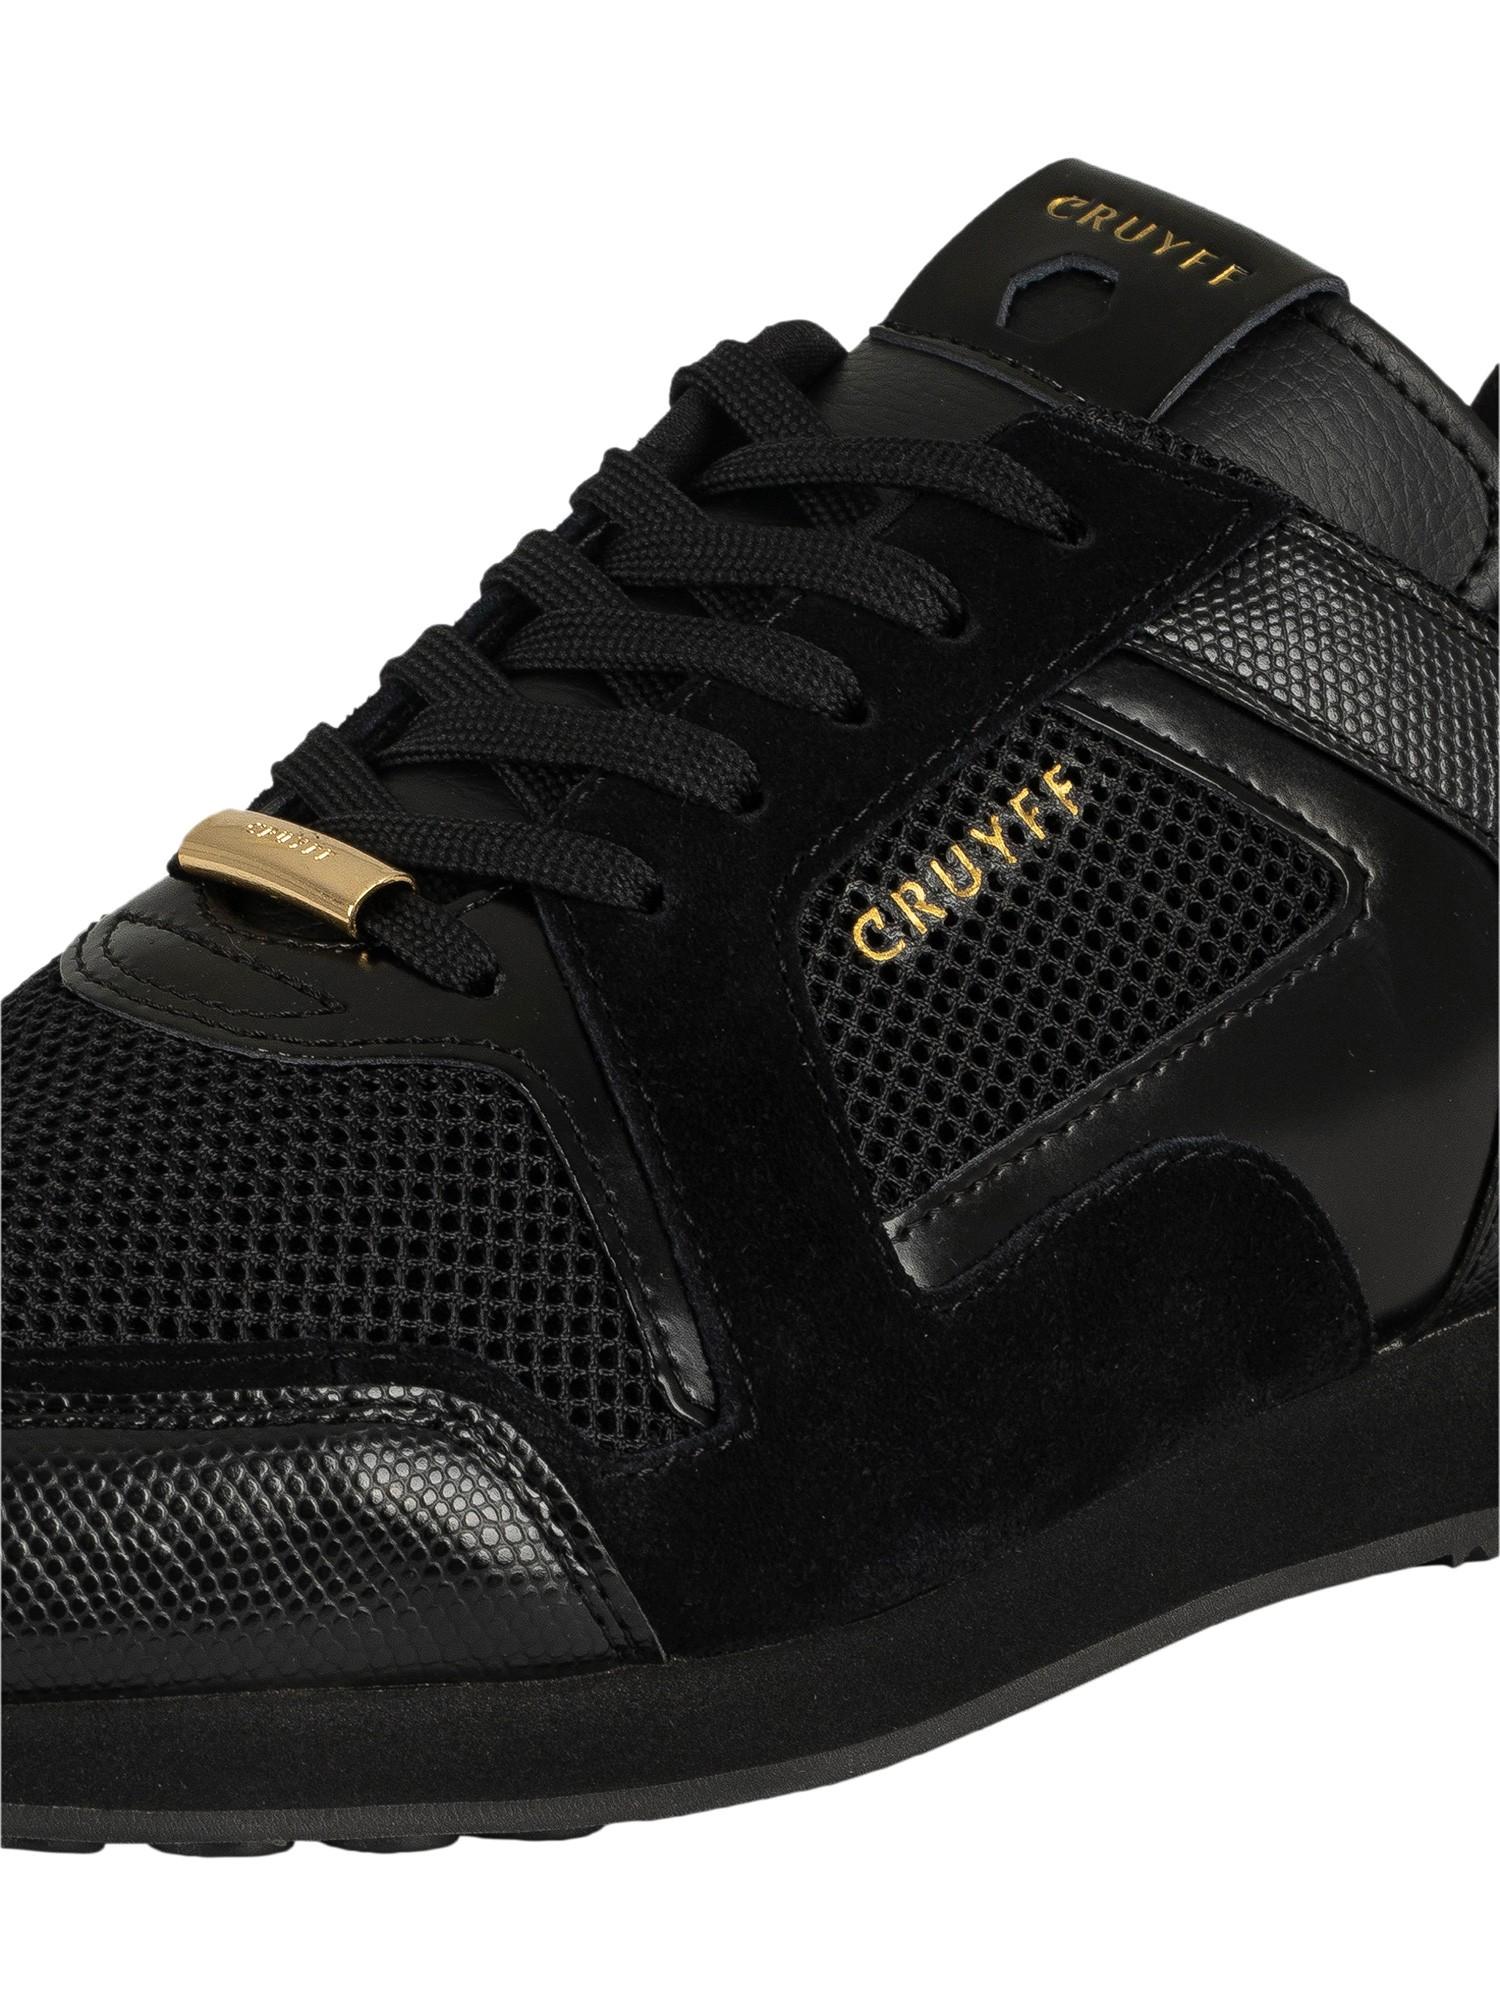 Cruyff Lusso Suede Trainers in Black for Men | Lyst